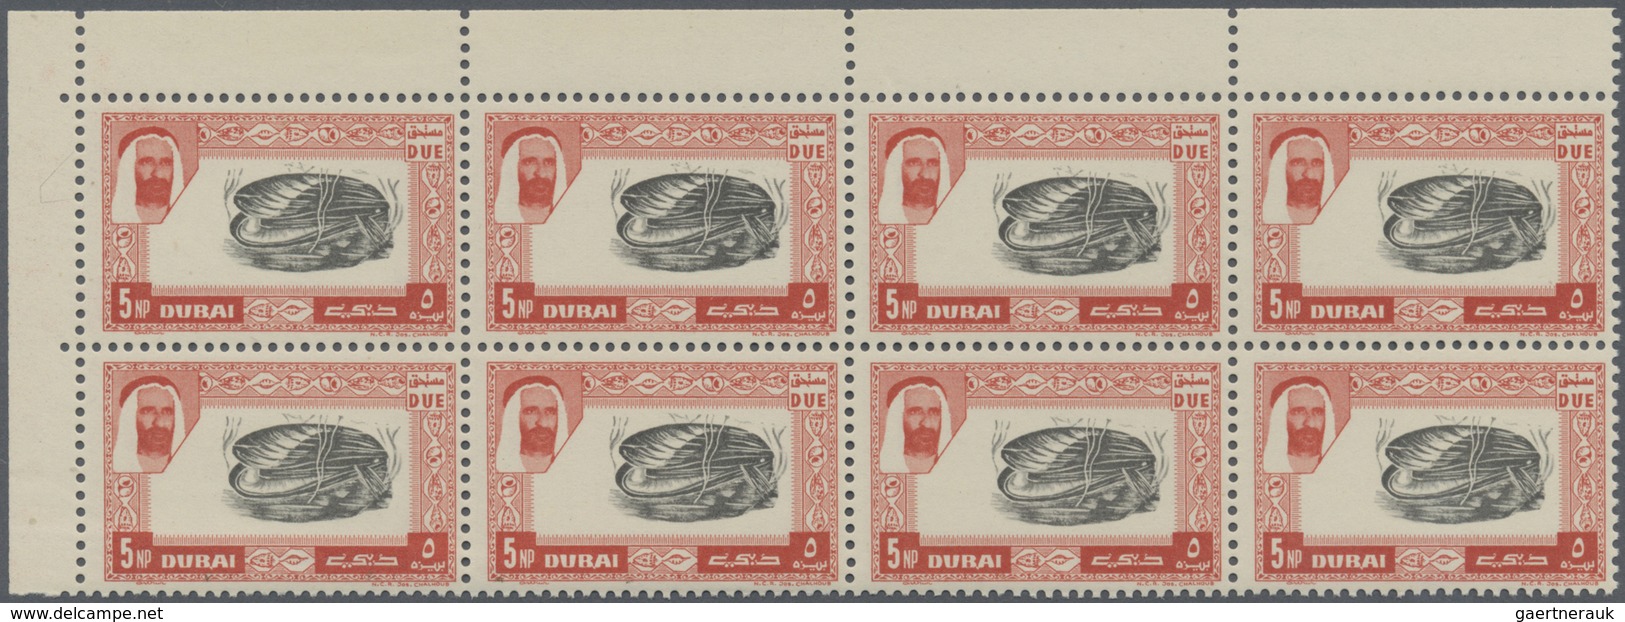 ** Dubai - Portomarken: 1963, Mussel 5np. With OFFSET Of Orange-red Frame In A Perf. Block Of 8 From Up - Dubai